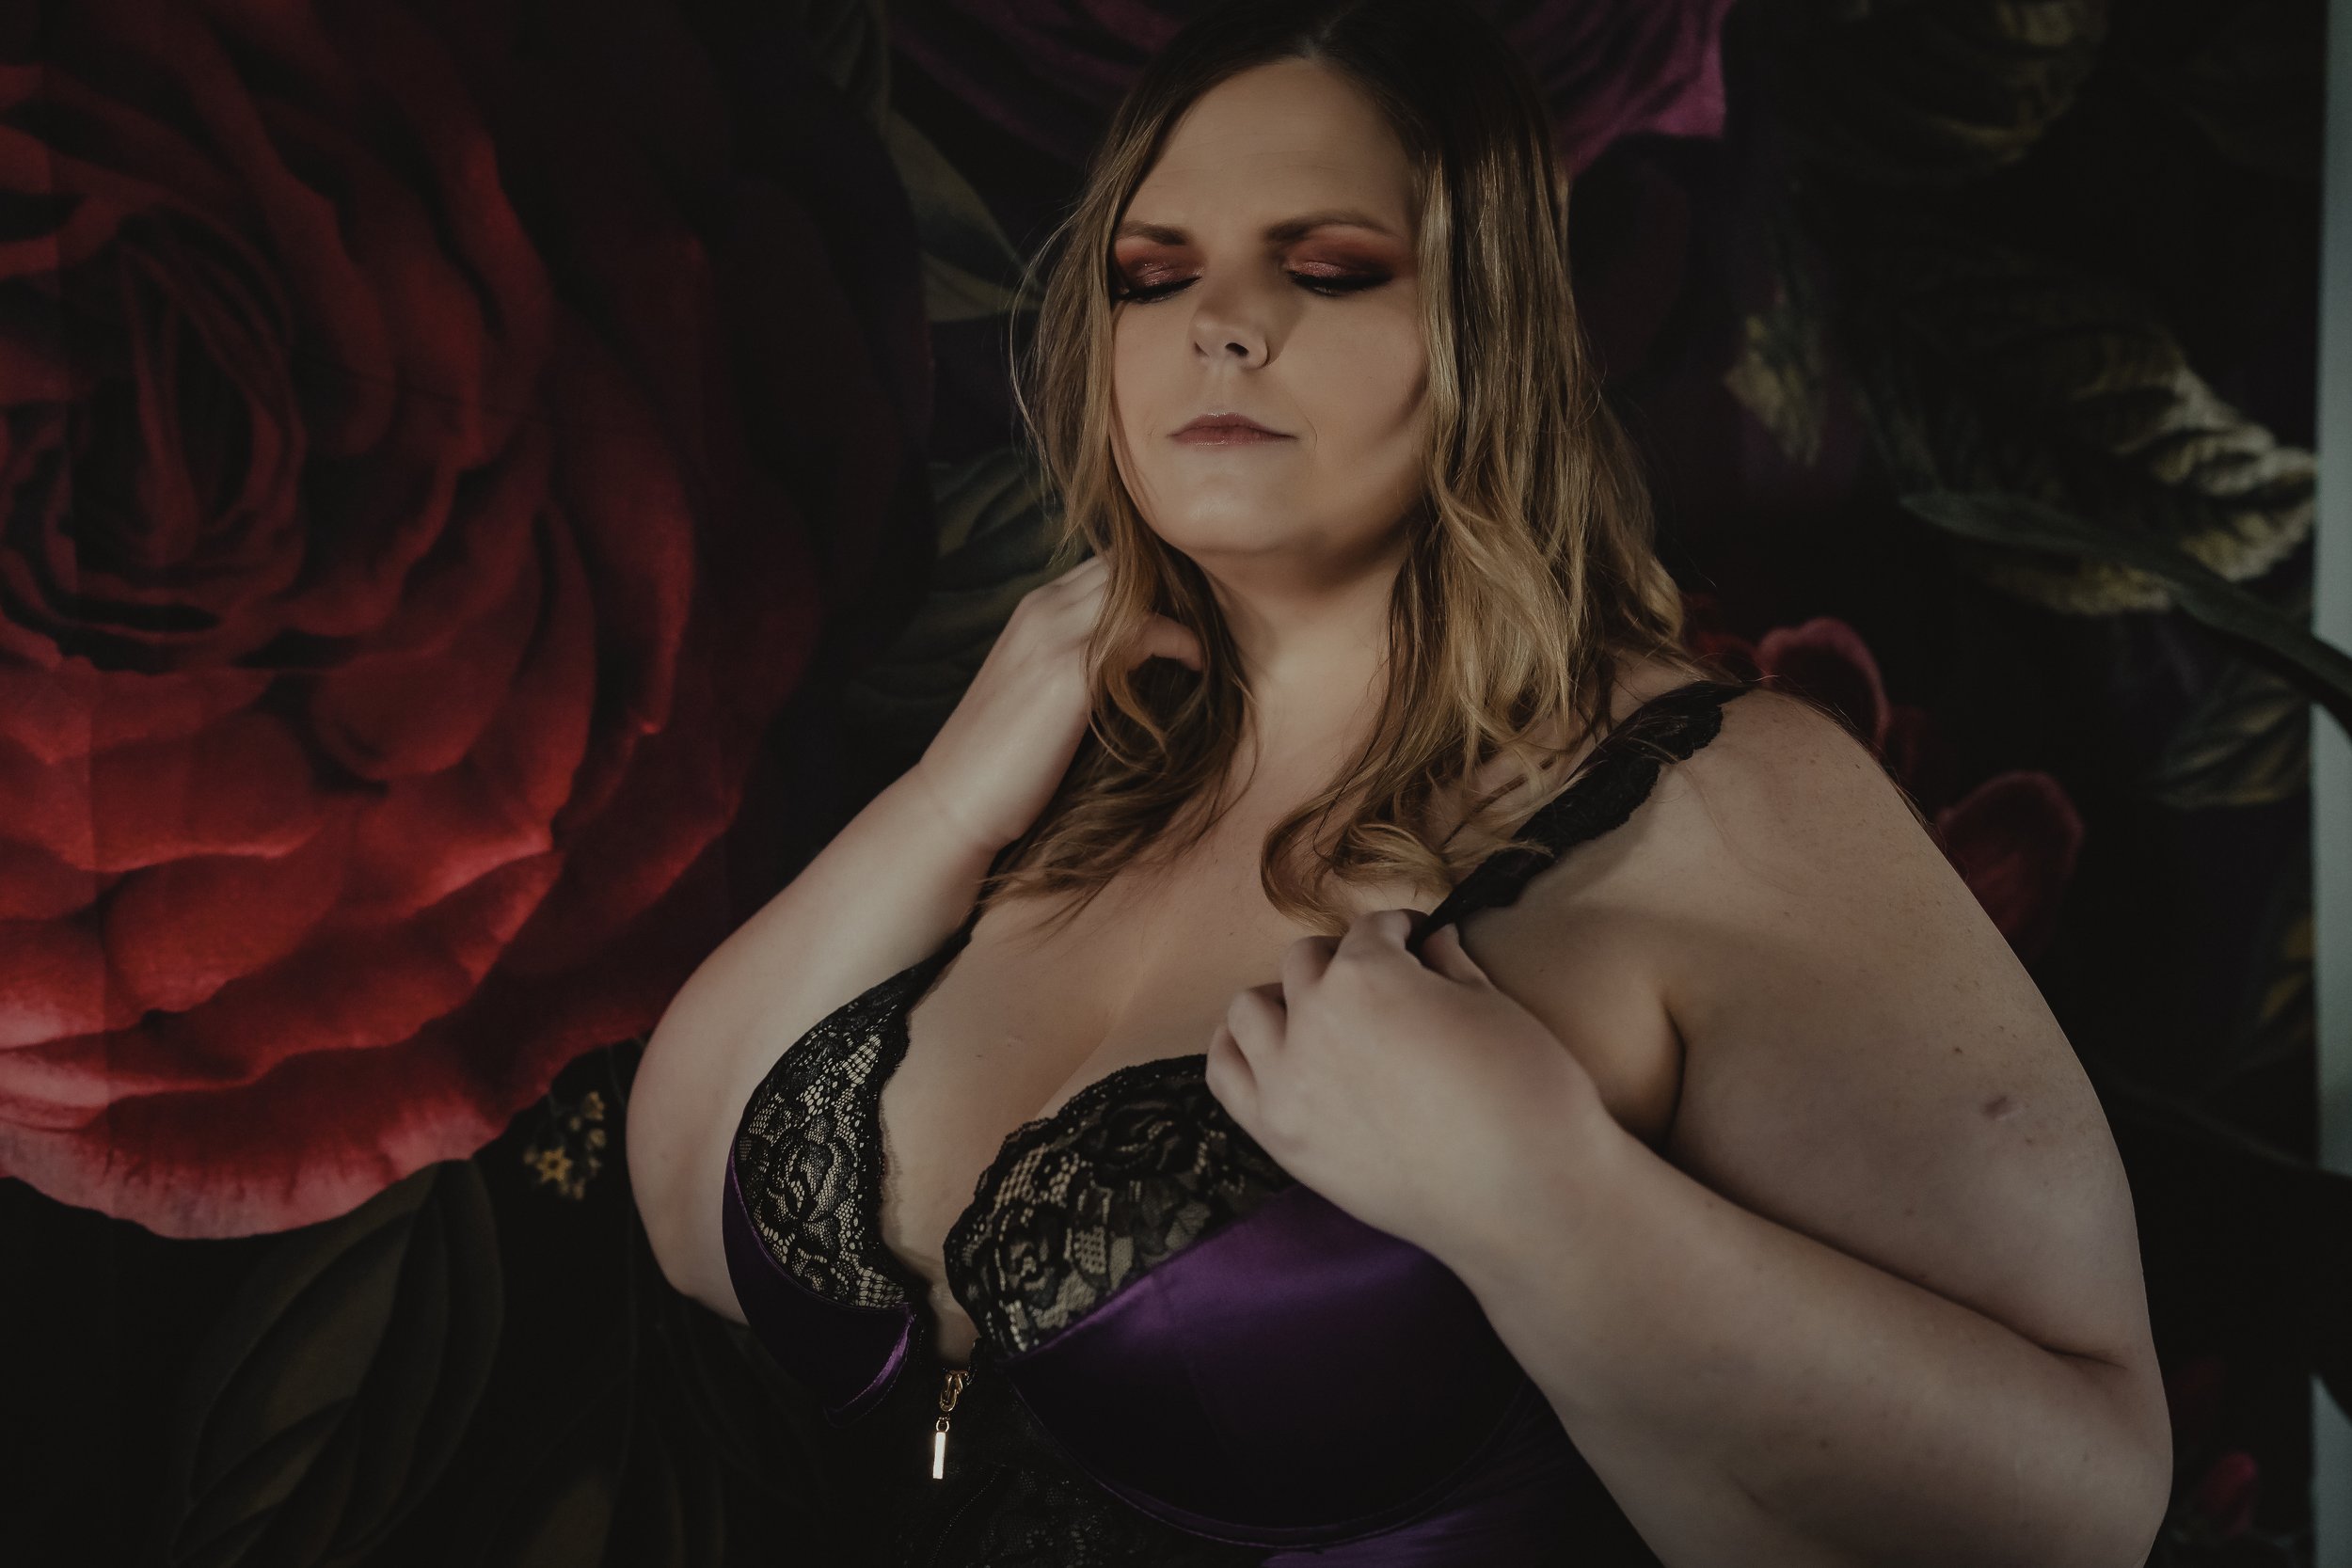 Best Places to Buy Lingerie for Your Boudoir Photoshoot